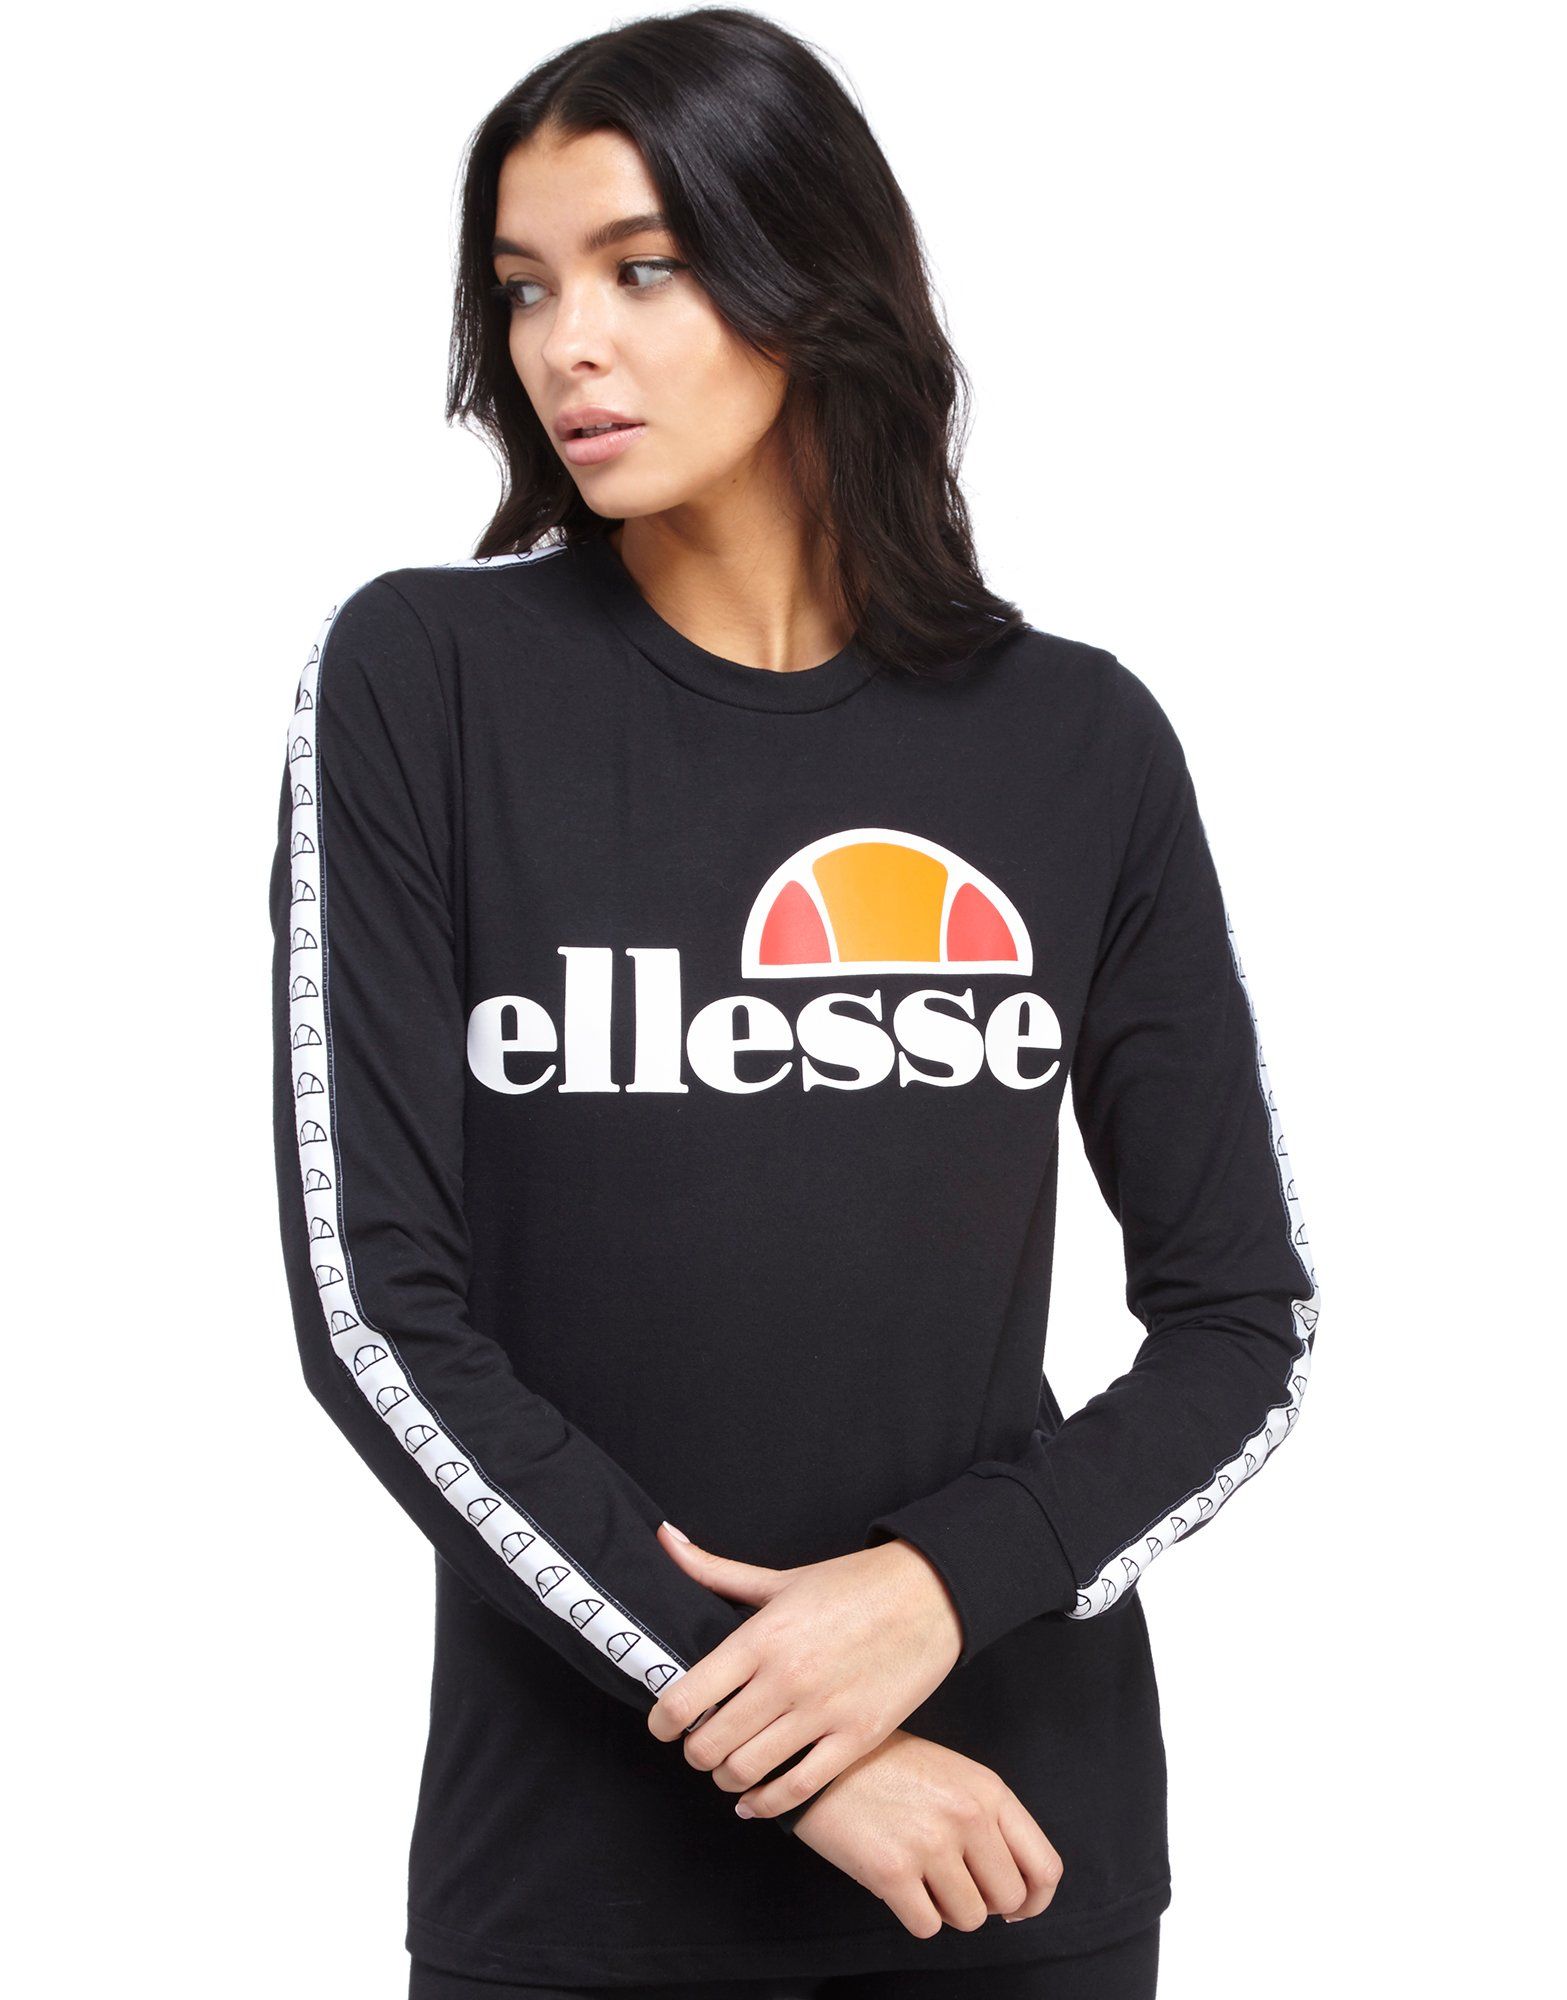 Clothes jd sport t shirt ellesse style official site, Wedding party dresses for mens in sri lanka, elizabeth arden visible difference refining moisture cream comple. 